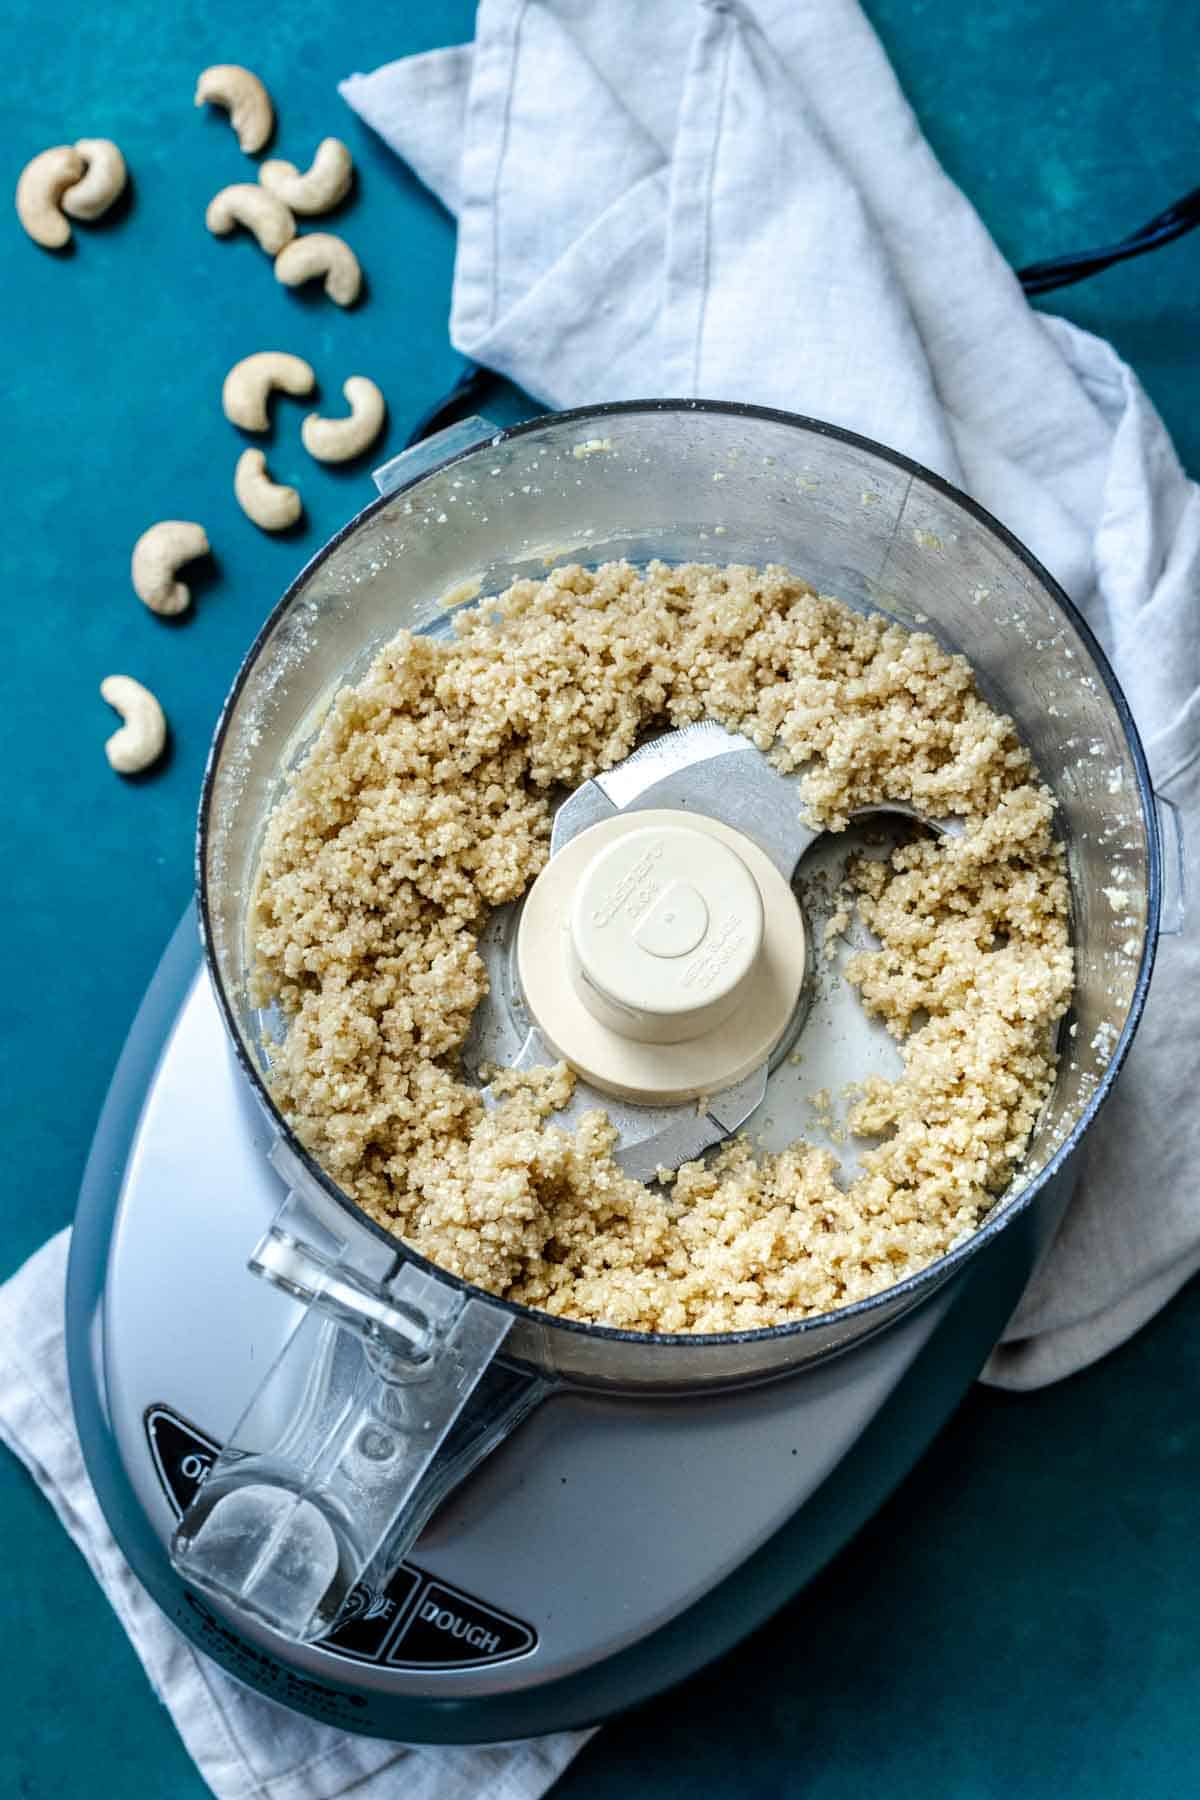 A blender on a white towel filled with a wet crumble of cashews and whole cashews on laying next to it.